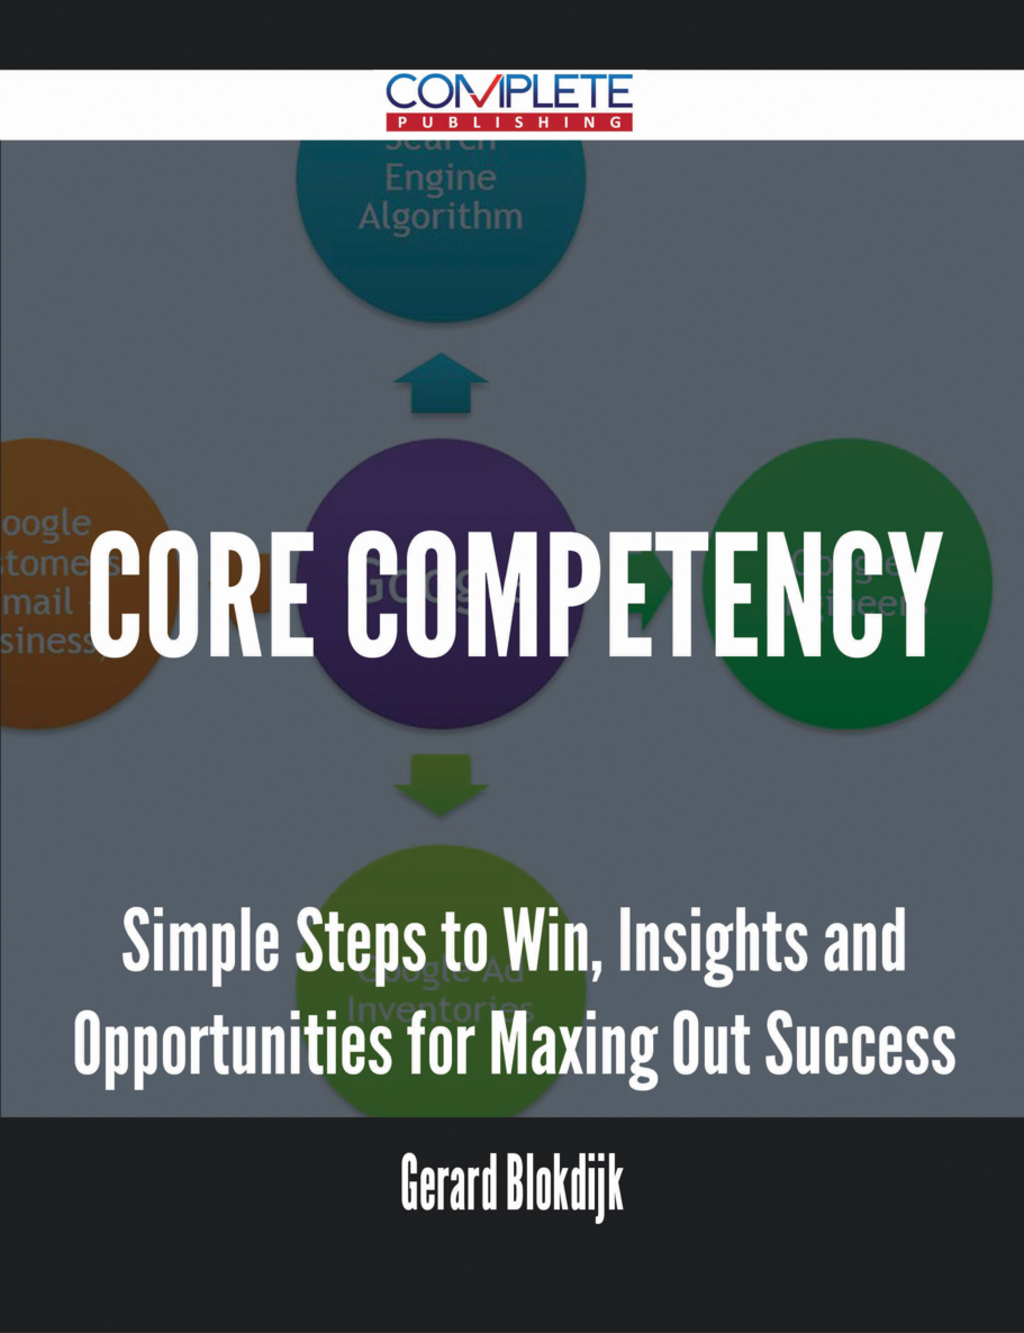 ISBN 9781488896408 product image for Core competency - Simple Steps to Win  Insights and Opportunities for Maxing Out | upcitemdb.com